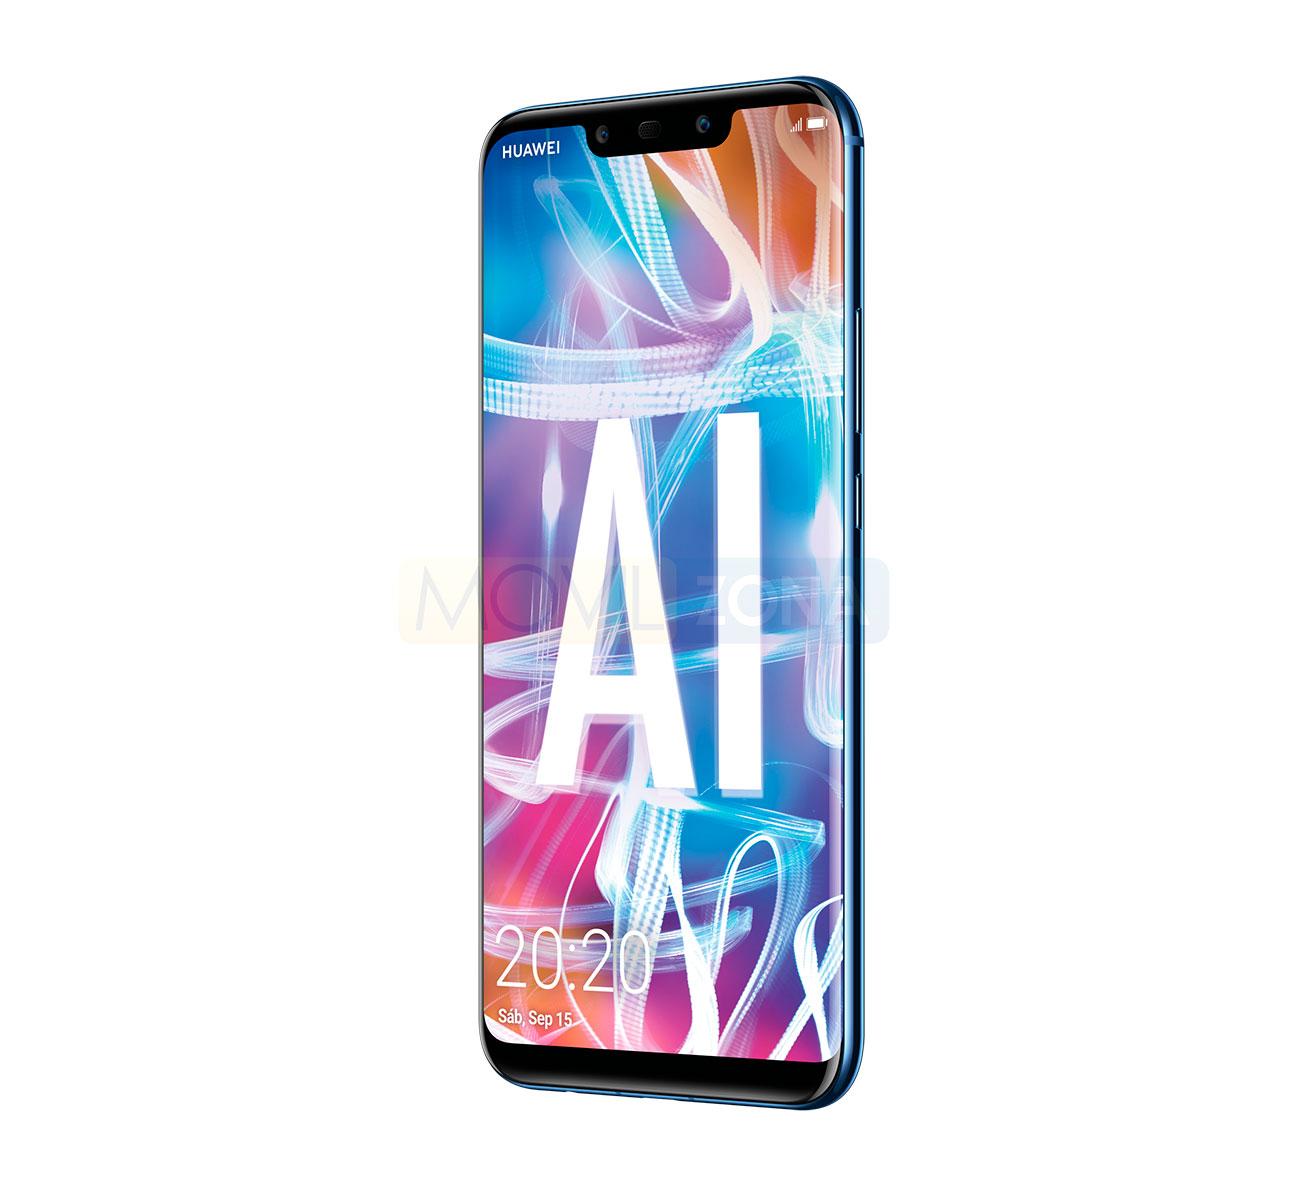 Huawei Mate 20 Lite Android